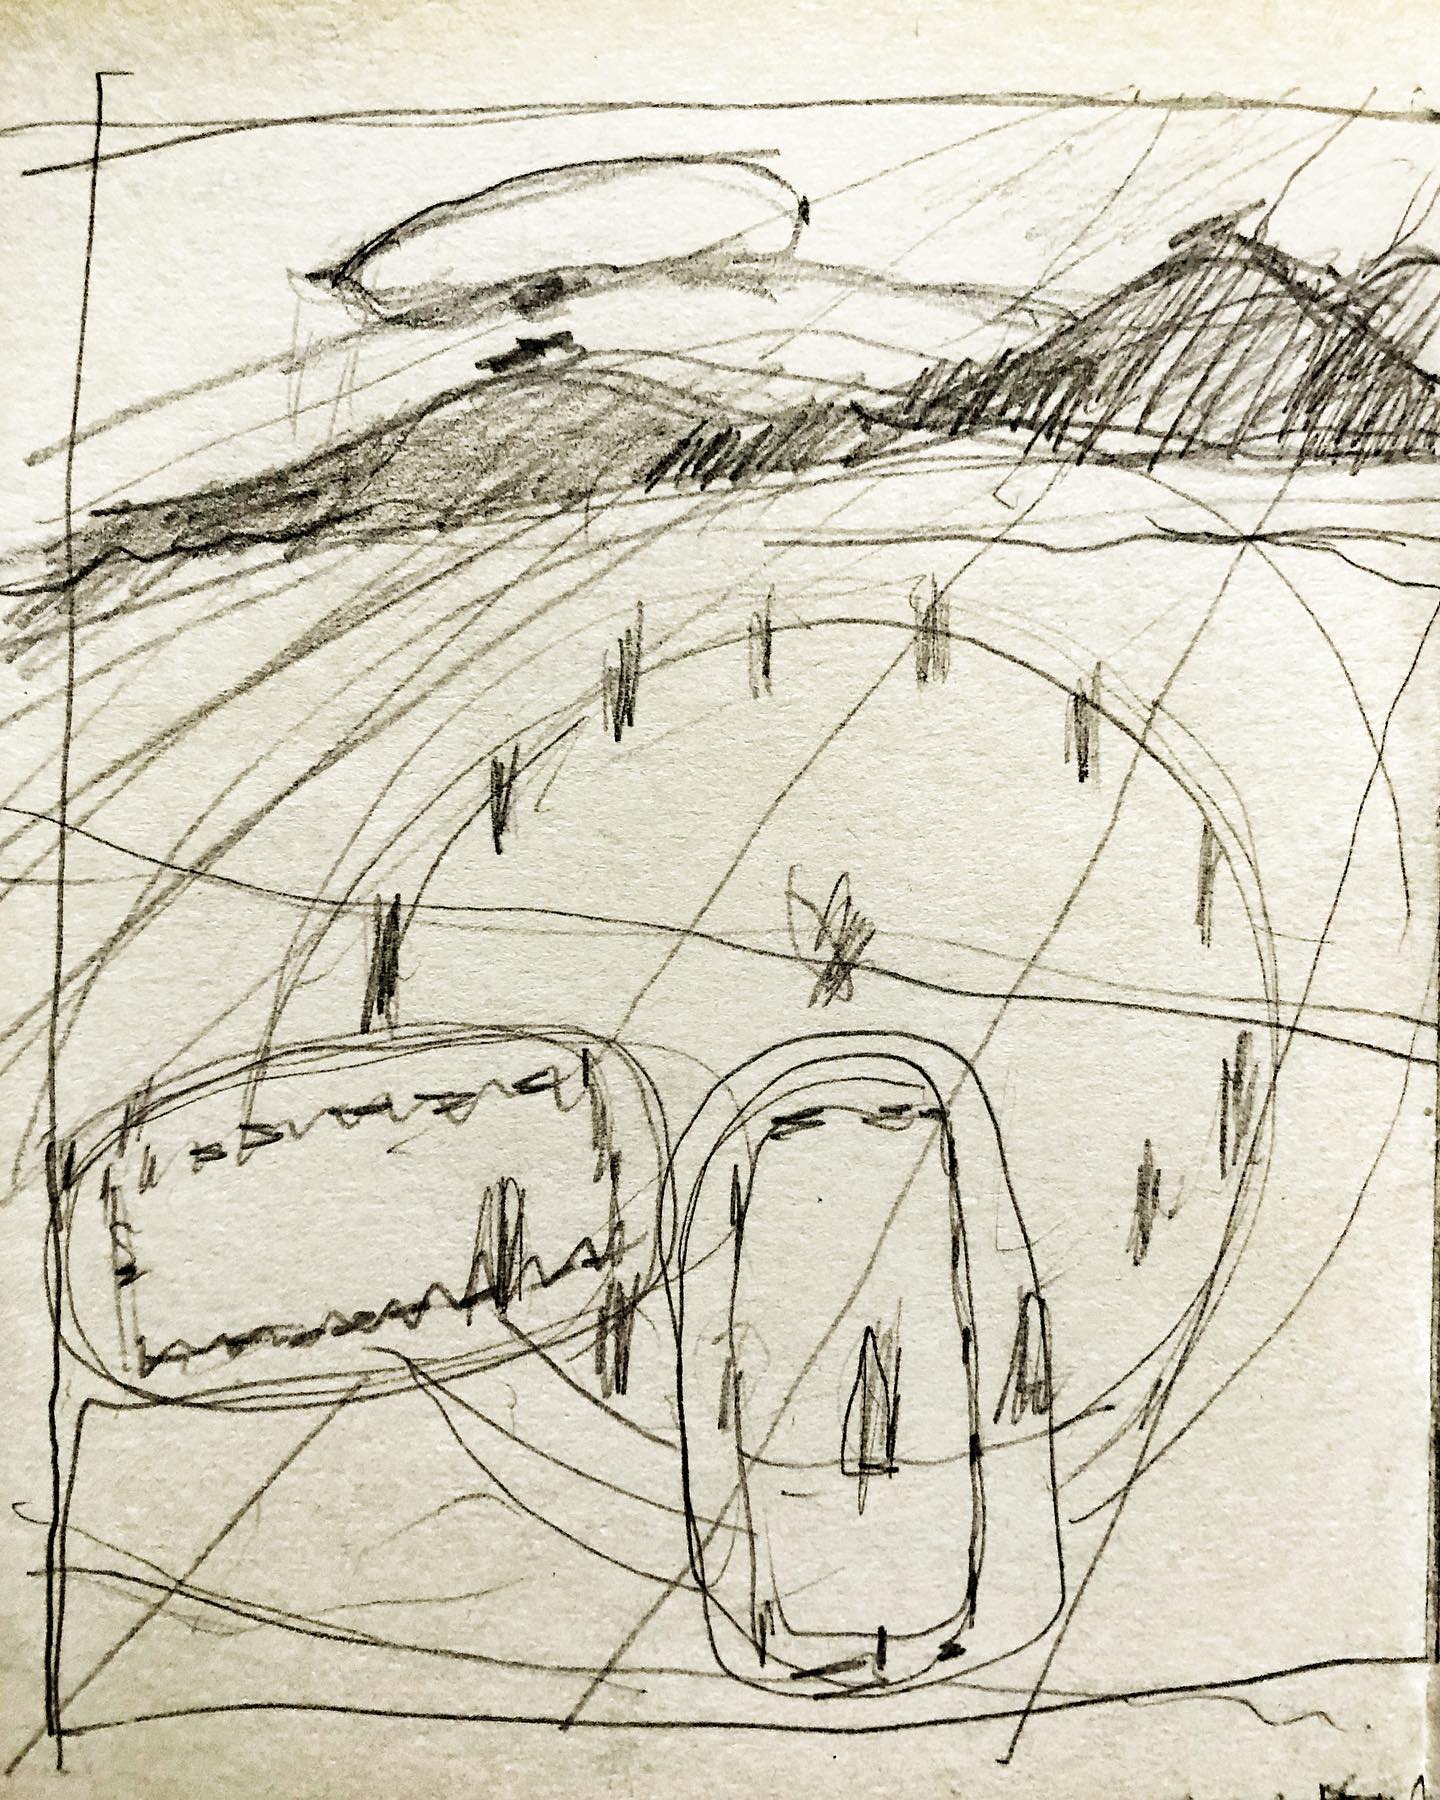 out and about on bodmin moor. circles, halls, loganstones, hills and tors. sketch montage.